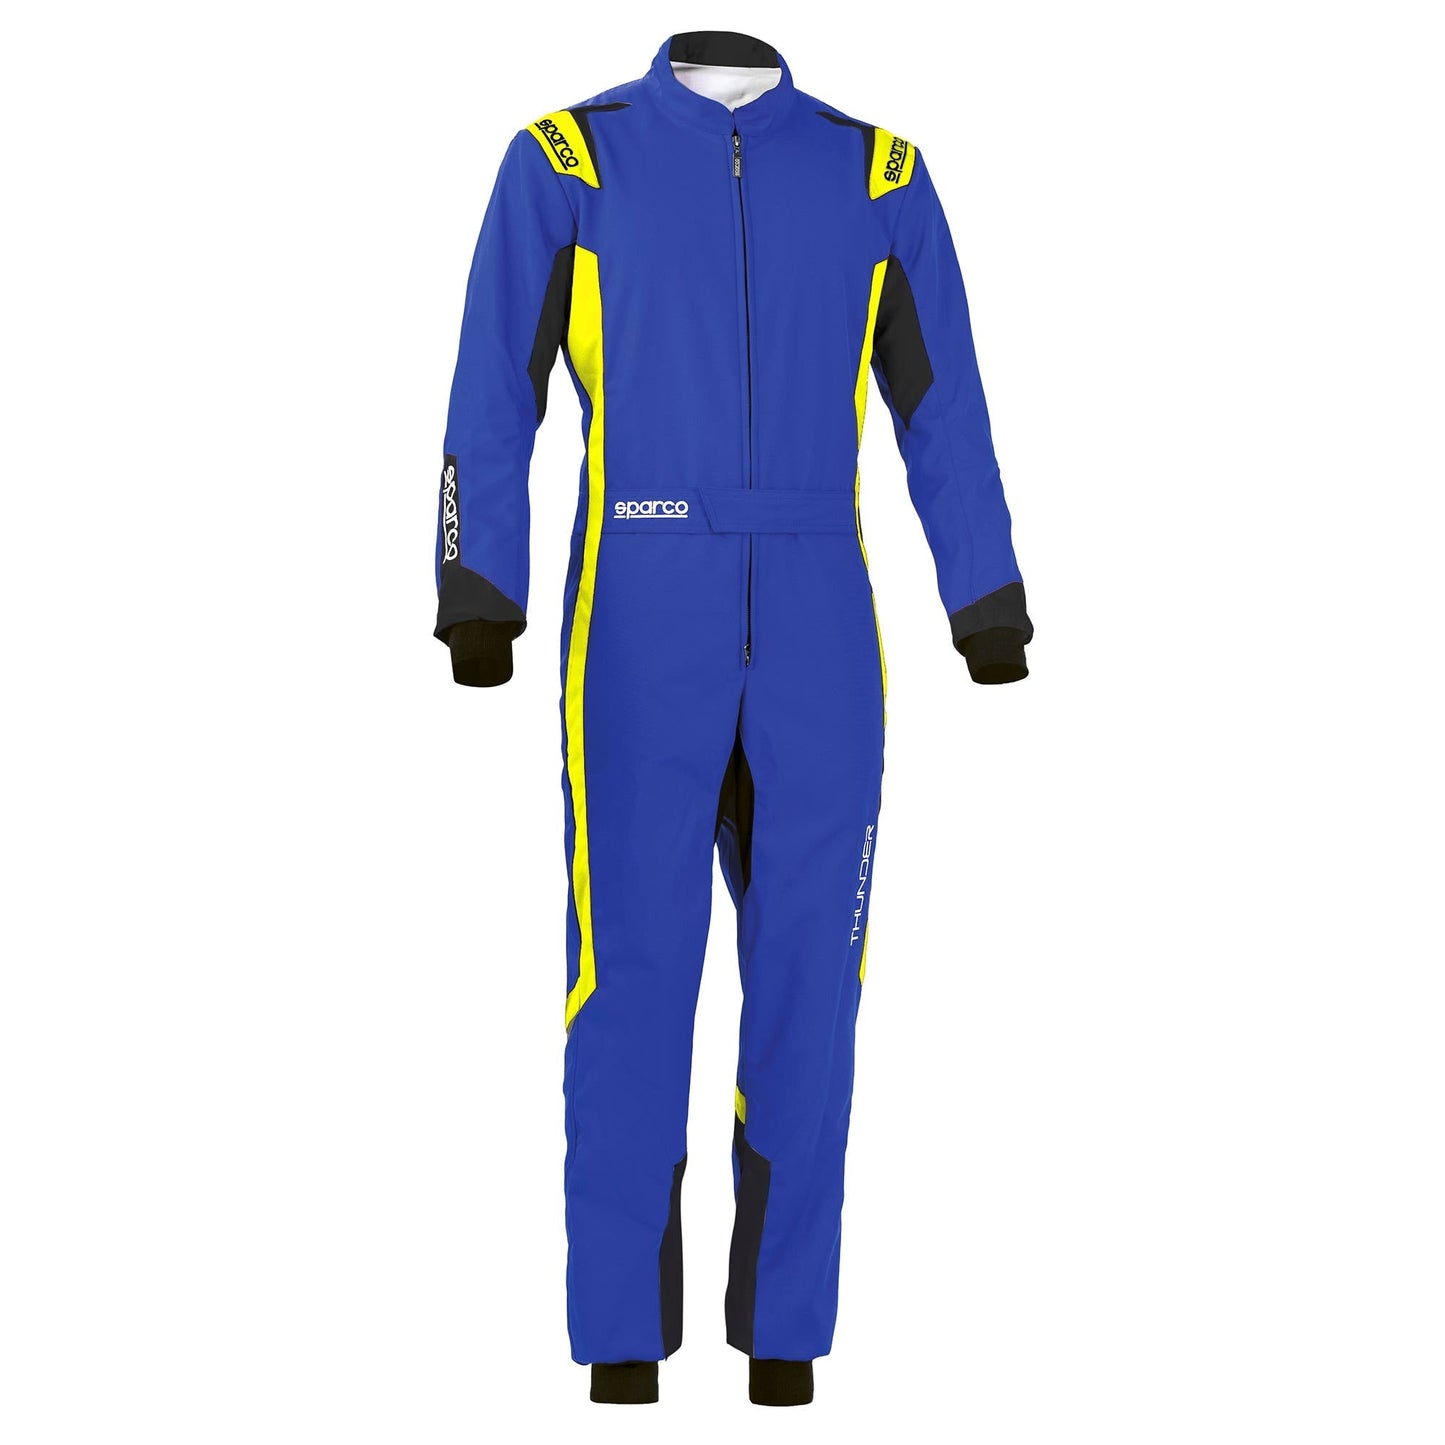 Sparco Thunder Kart Racing Suit